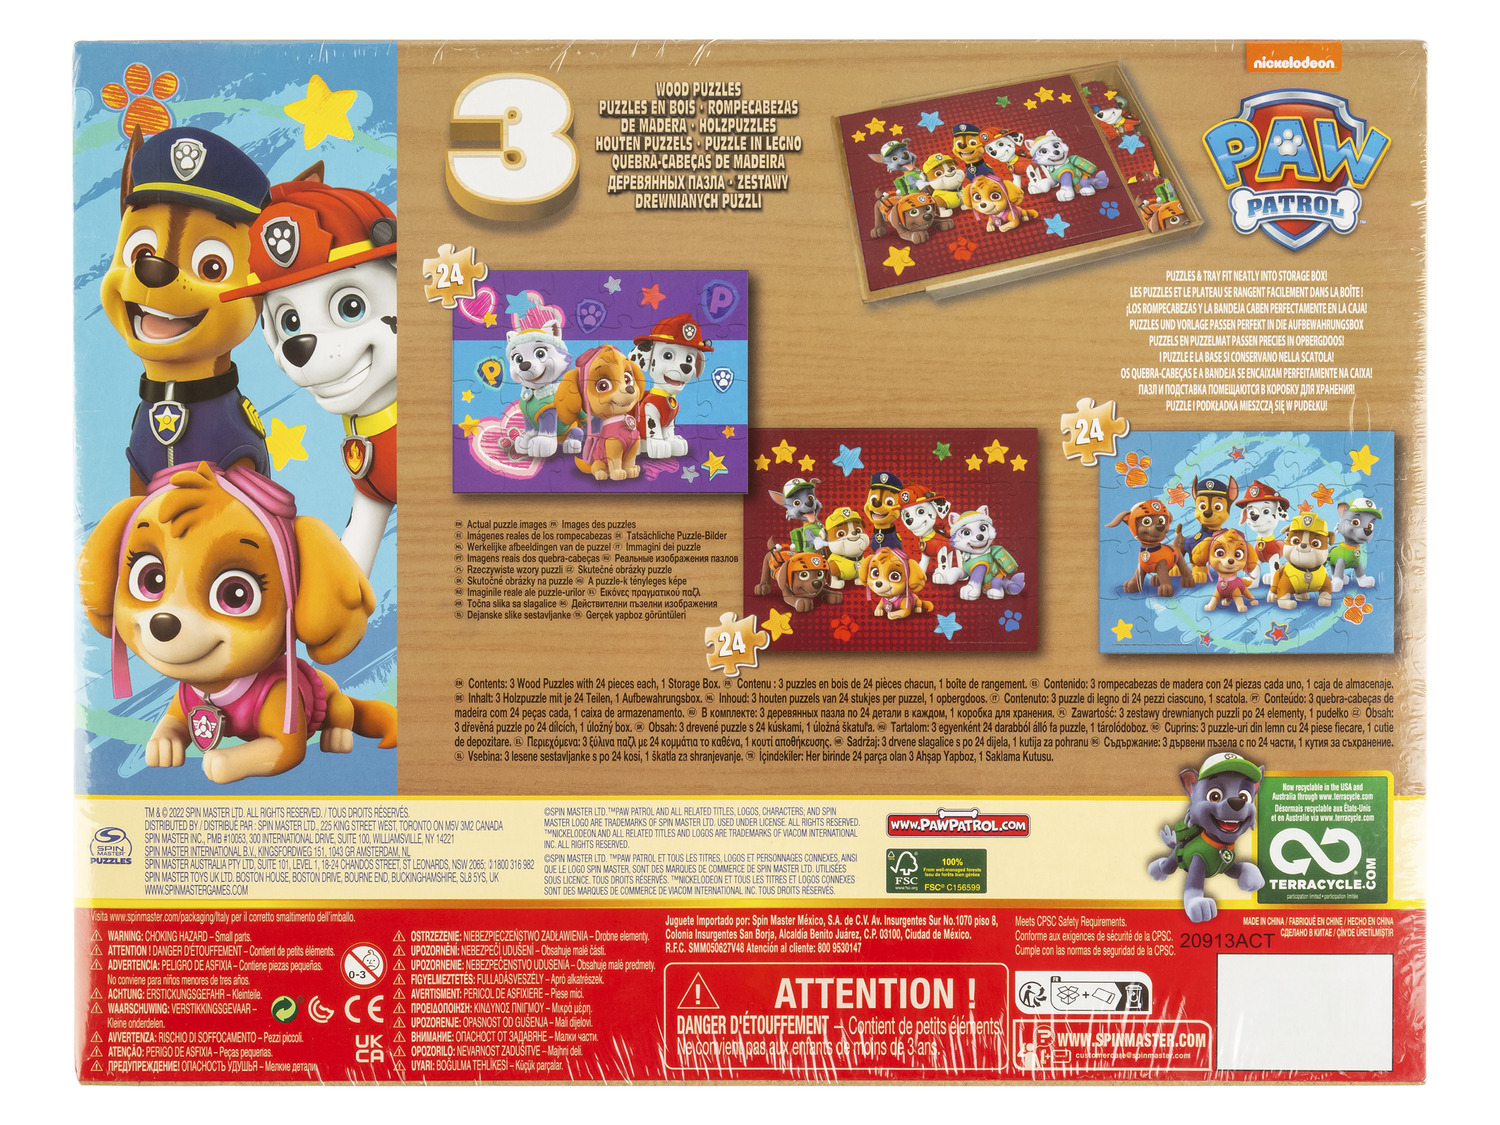 Spinmaster Paw Patrol Holz Puzzle, 72 Teile | LIDL | Puzzles